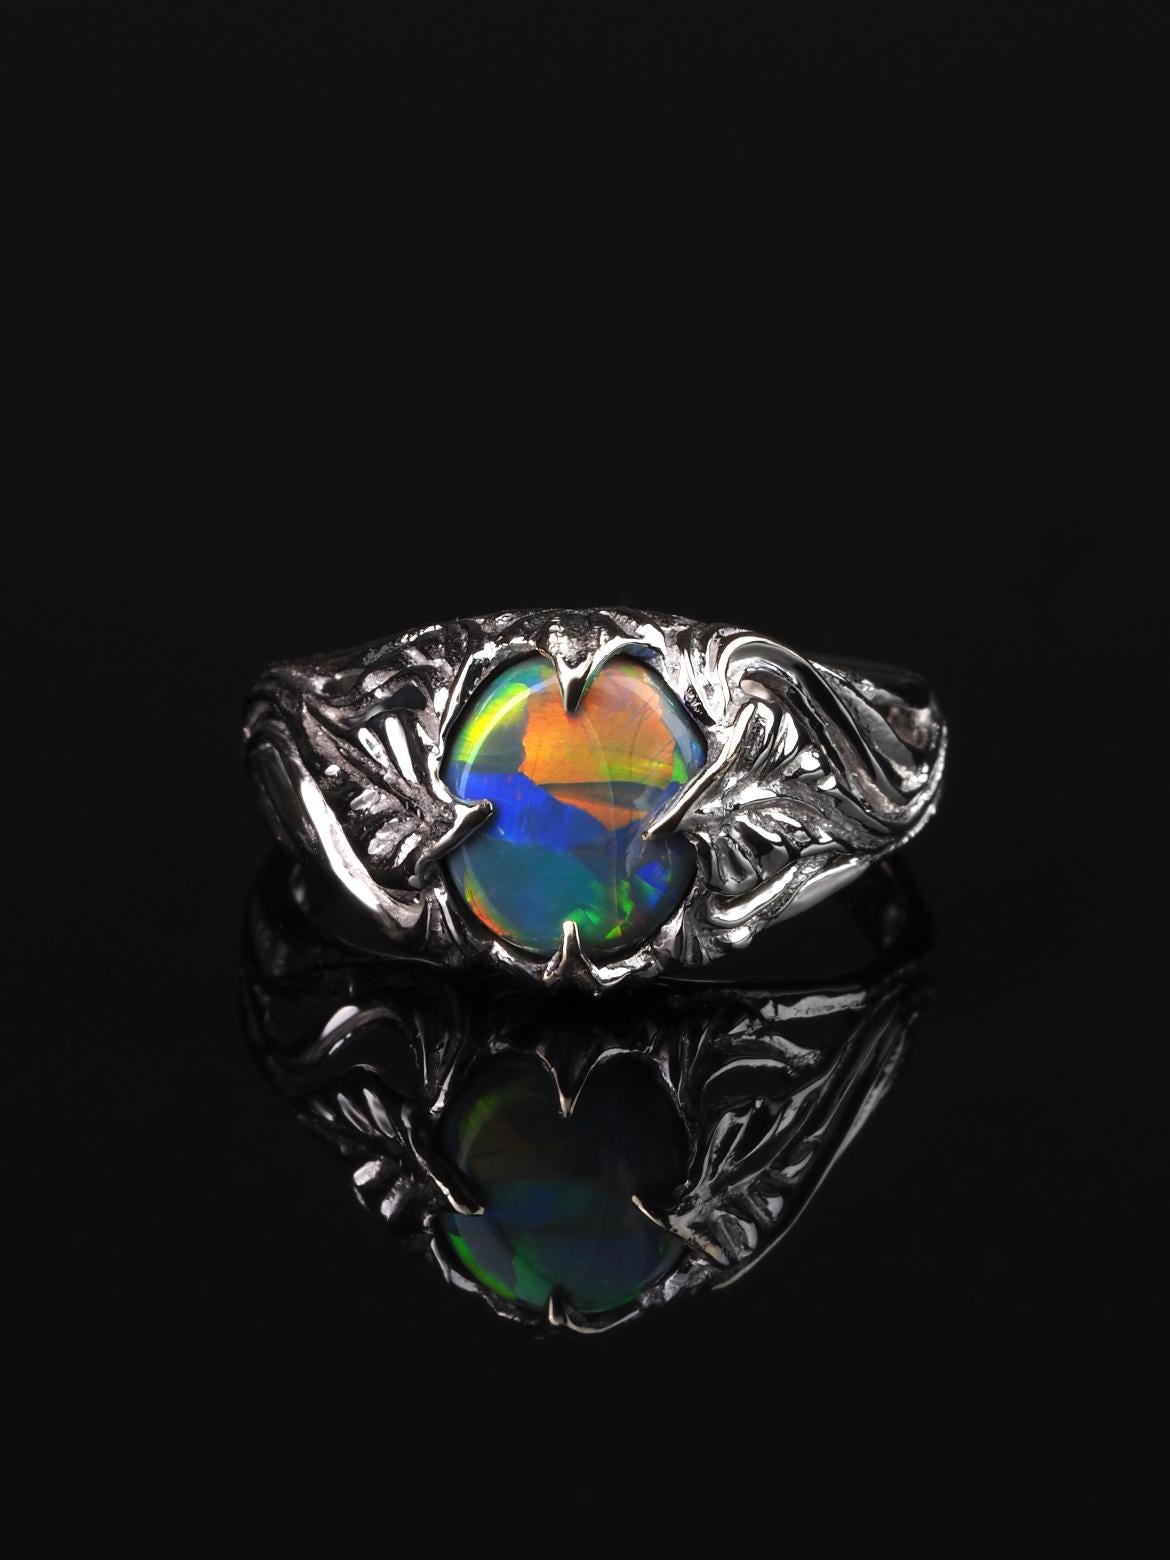 14K white gold ring with natural Dark Opal with bright opalescence 
opal origin - Australia
opal weight - 1.55 carats
stone measurements - 0.28 х 0.35 in / 7 х 9 mm
ring weight - 3.59 grams
ring size - 7 US (this ring may be resized, please contact